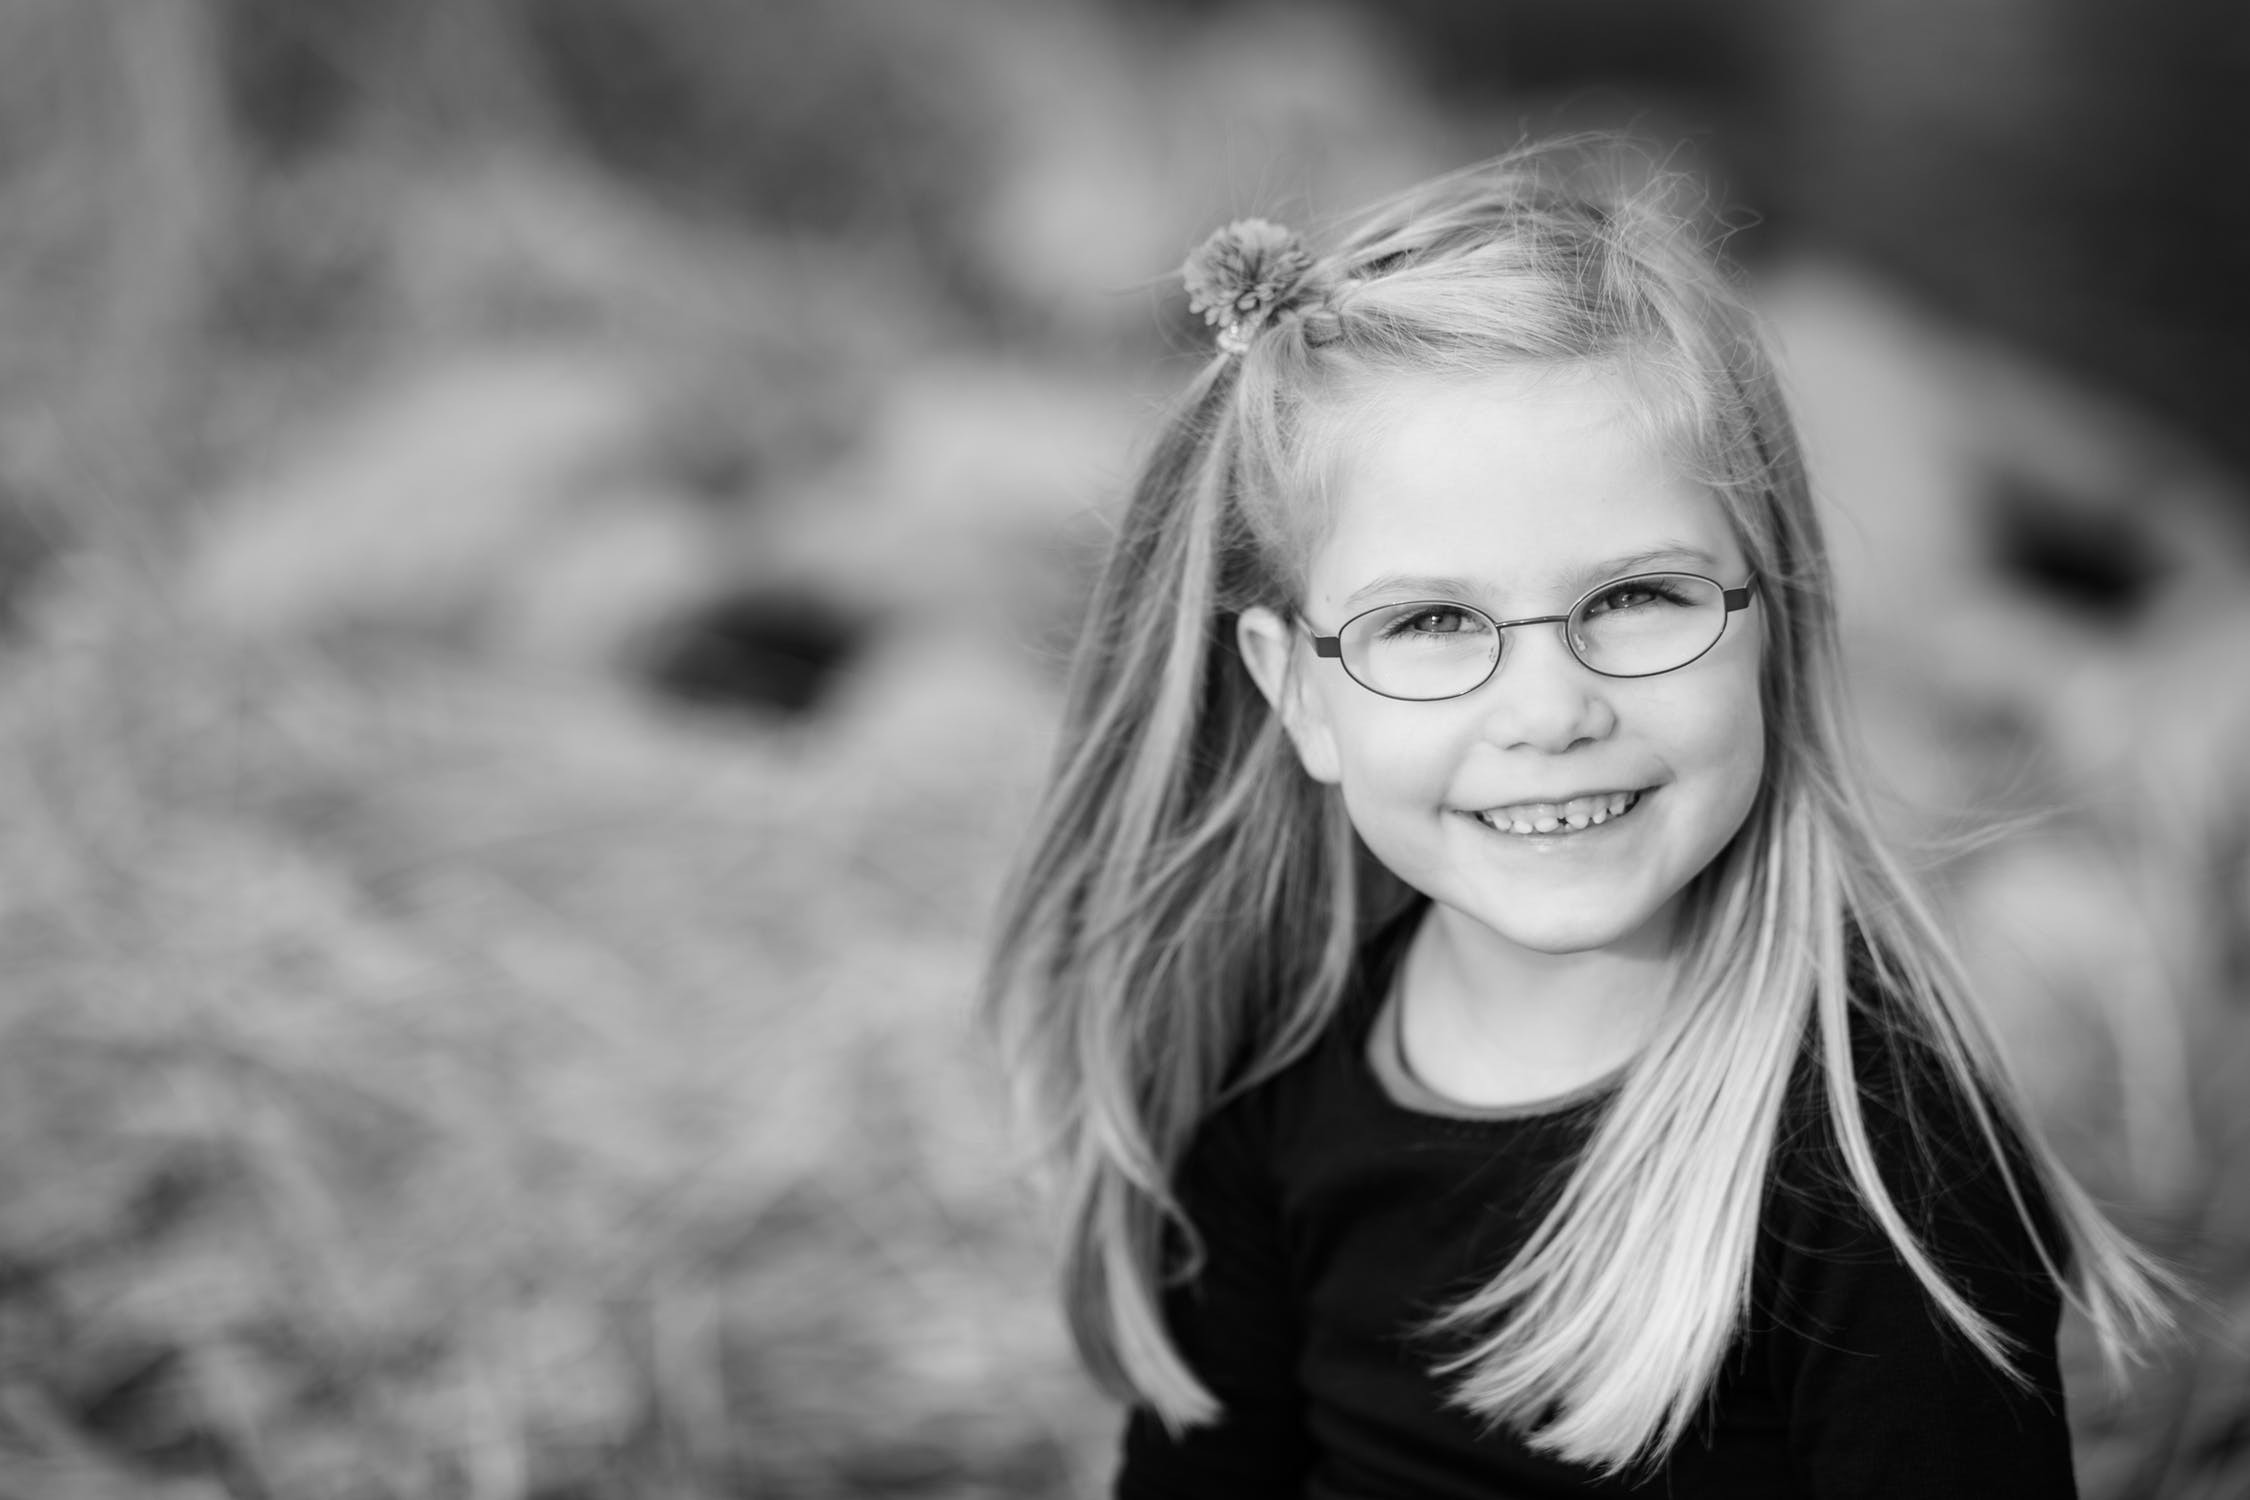 Image of a happy child with glasses